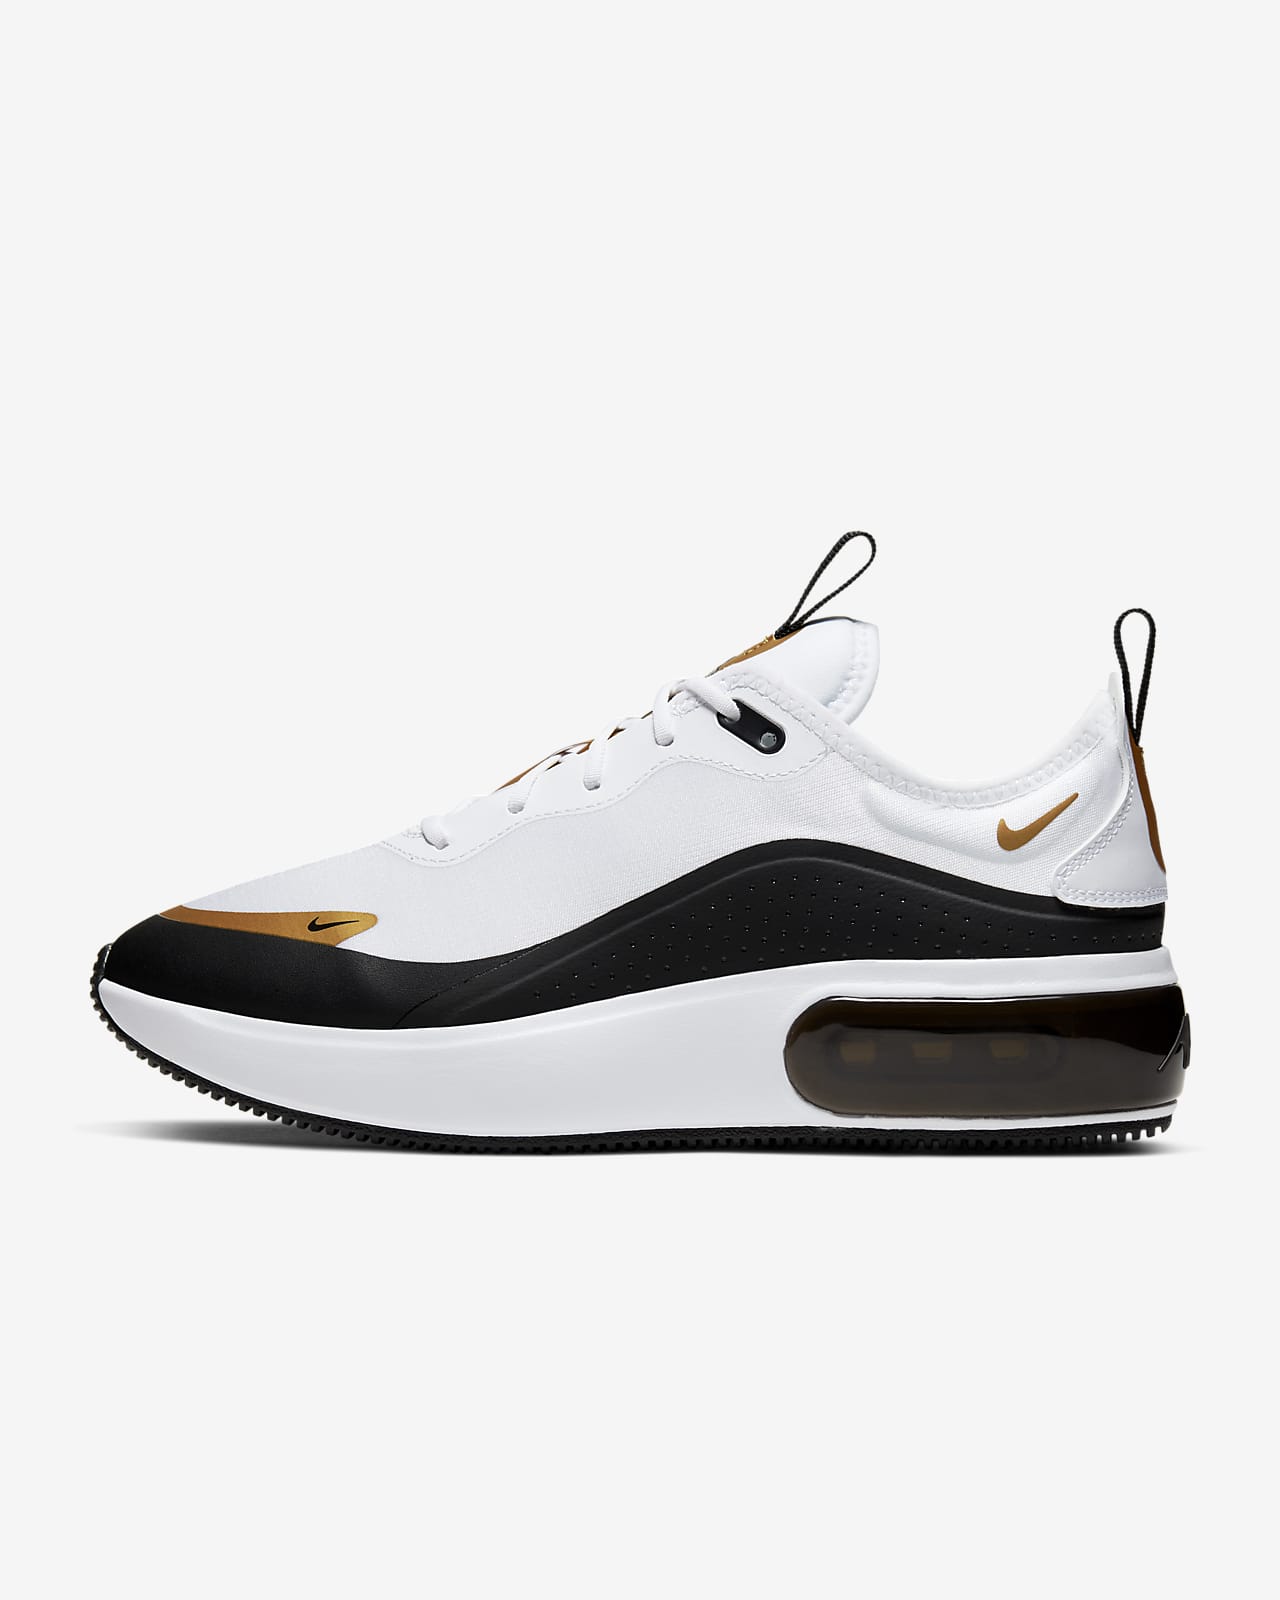 Chemist ugly greedy Women's Nike Air Max Dia Icon Clash 'White / Gold' $52.78 Free Shipping |  Sneaker Steal